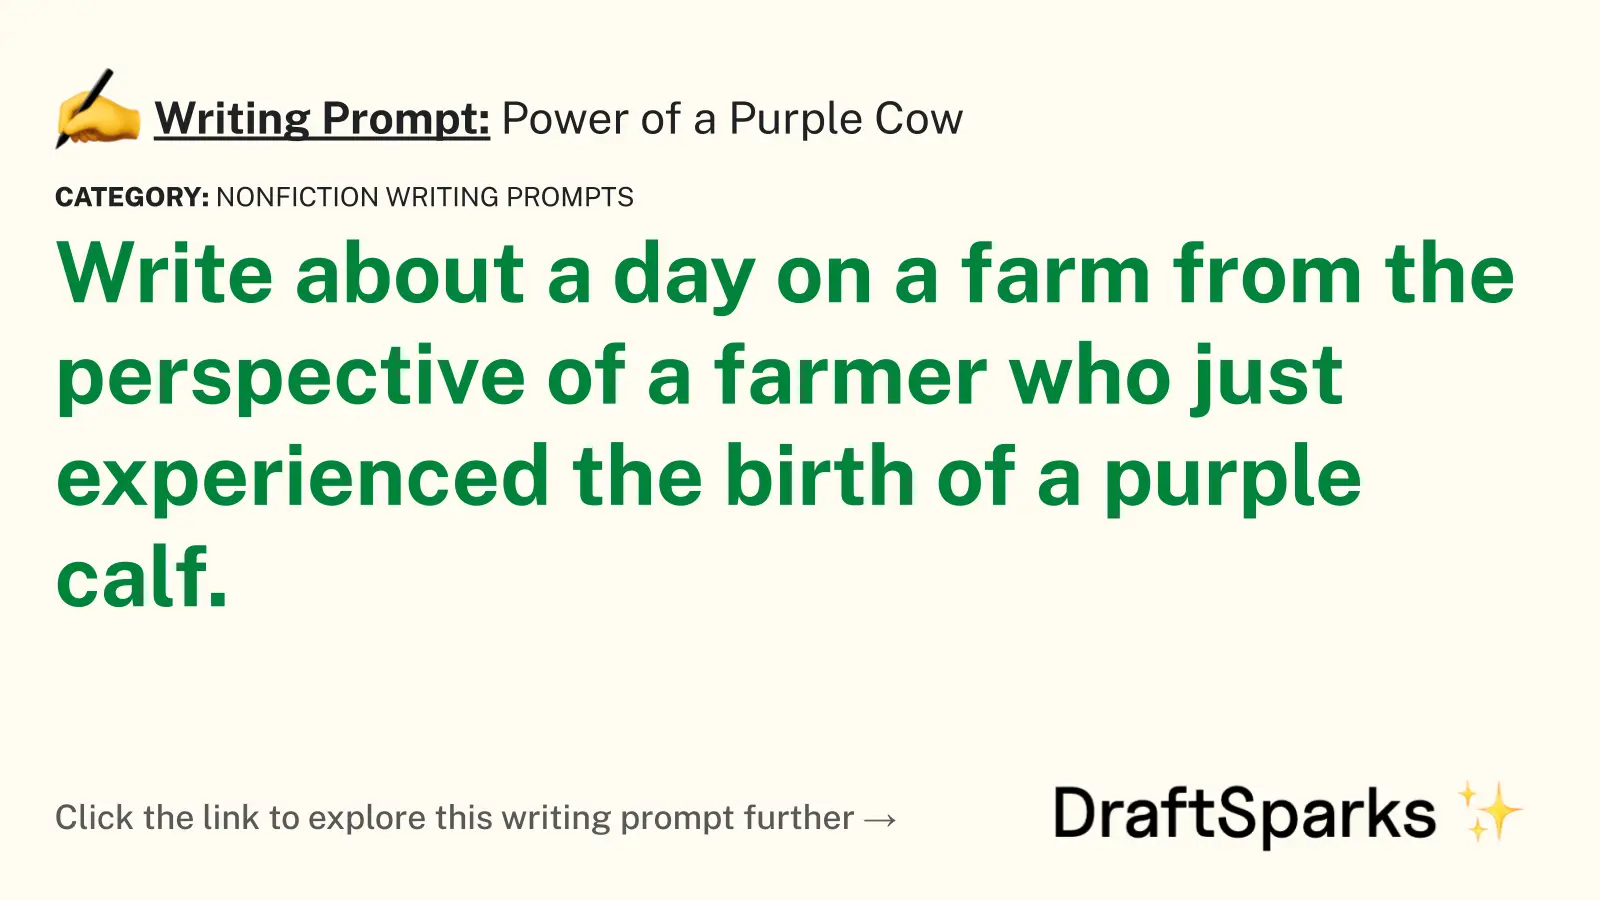 Power of a Purple Cow